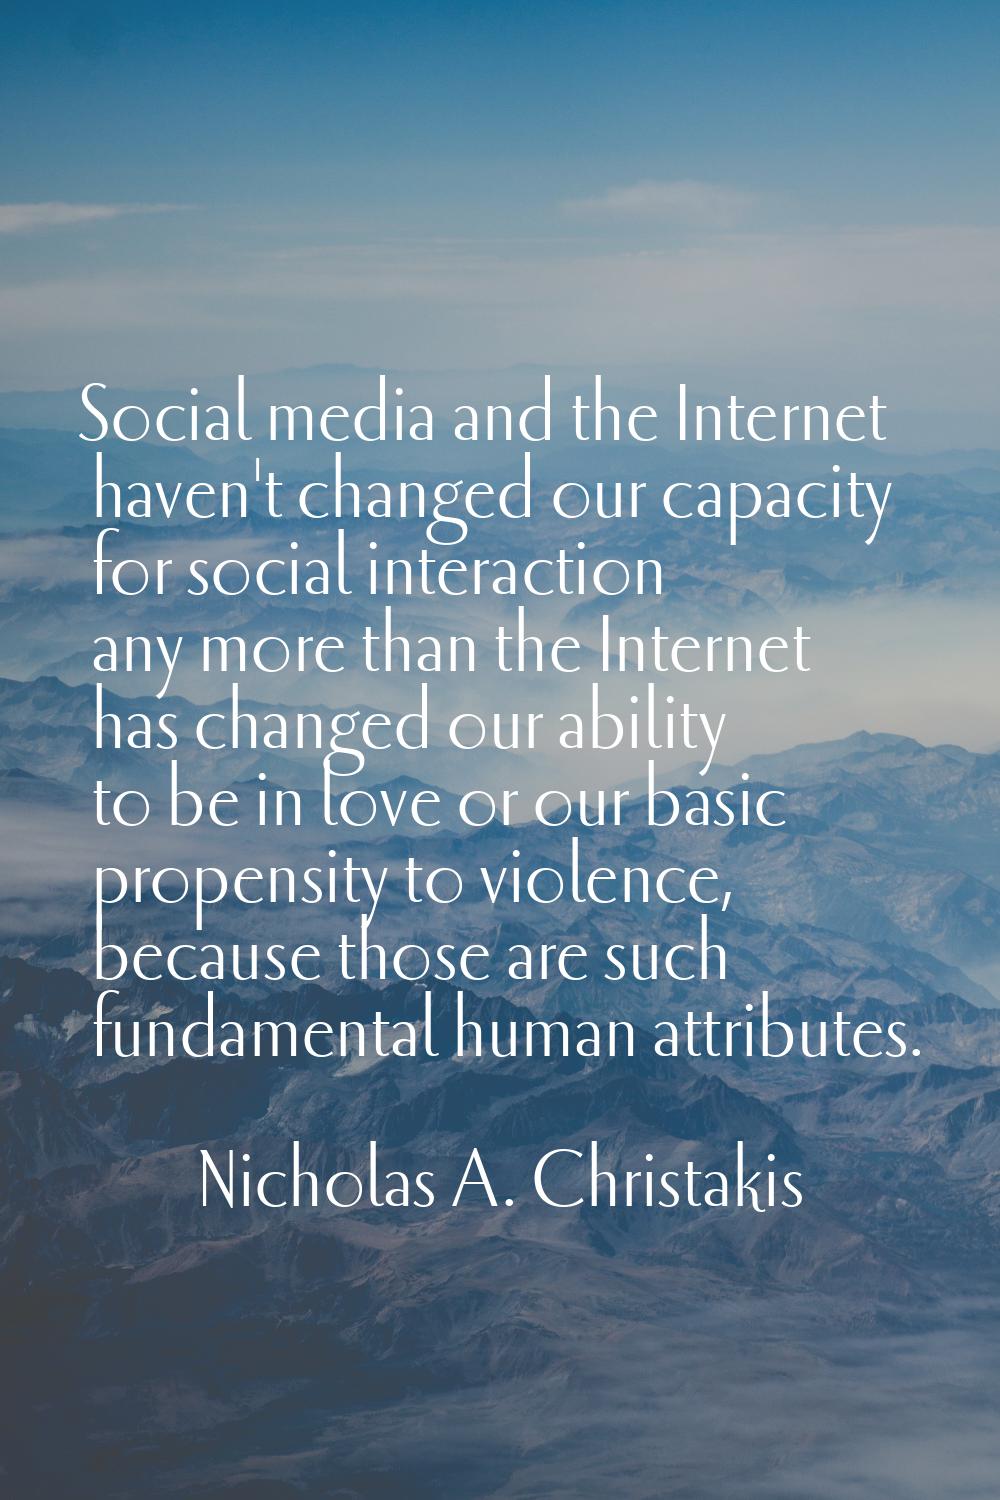 Social media and the Internet haven't changed our capacity for social interaction any more than the